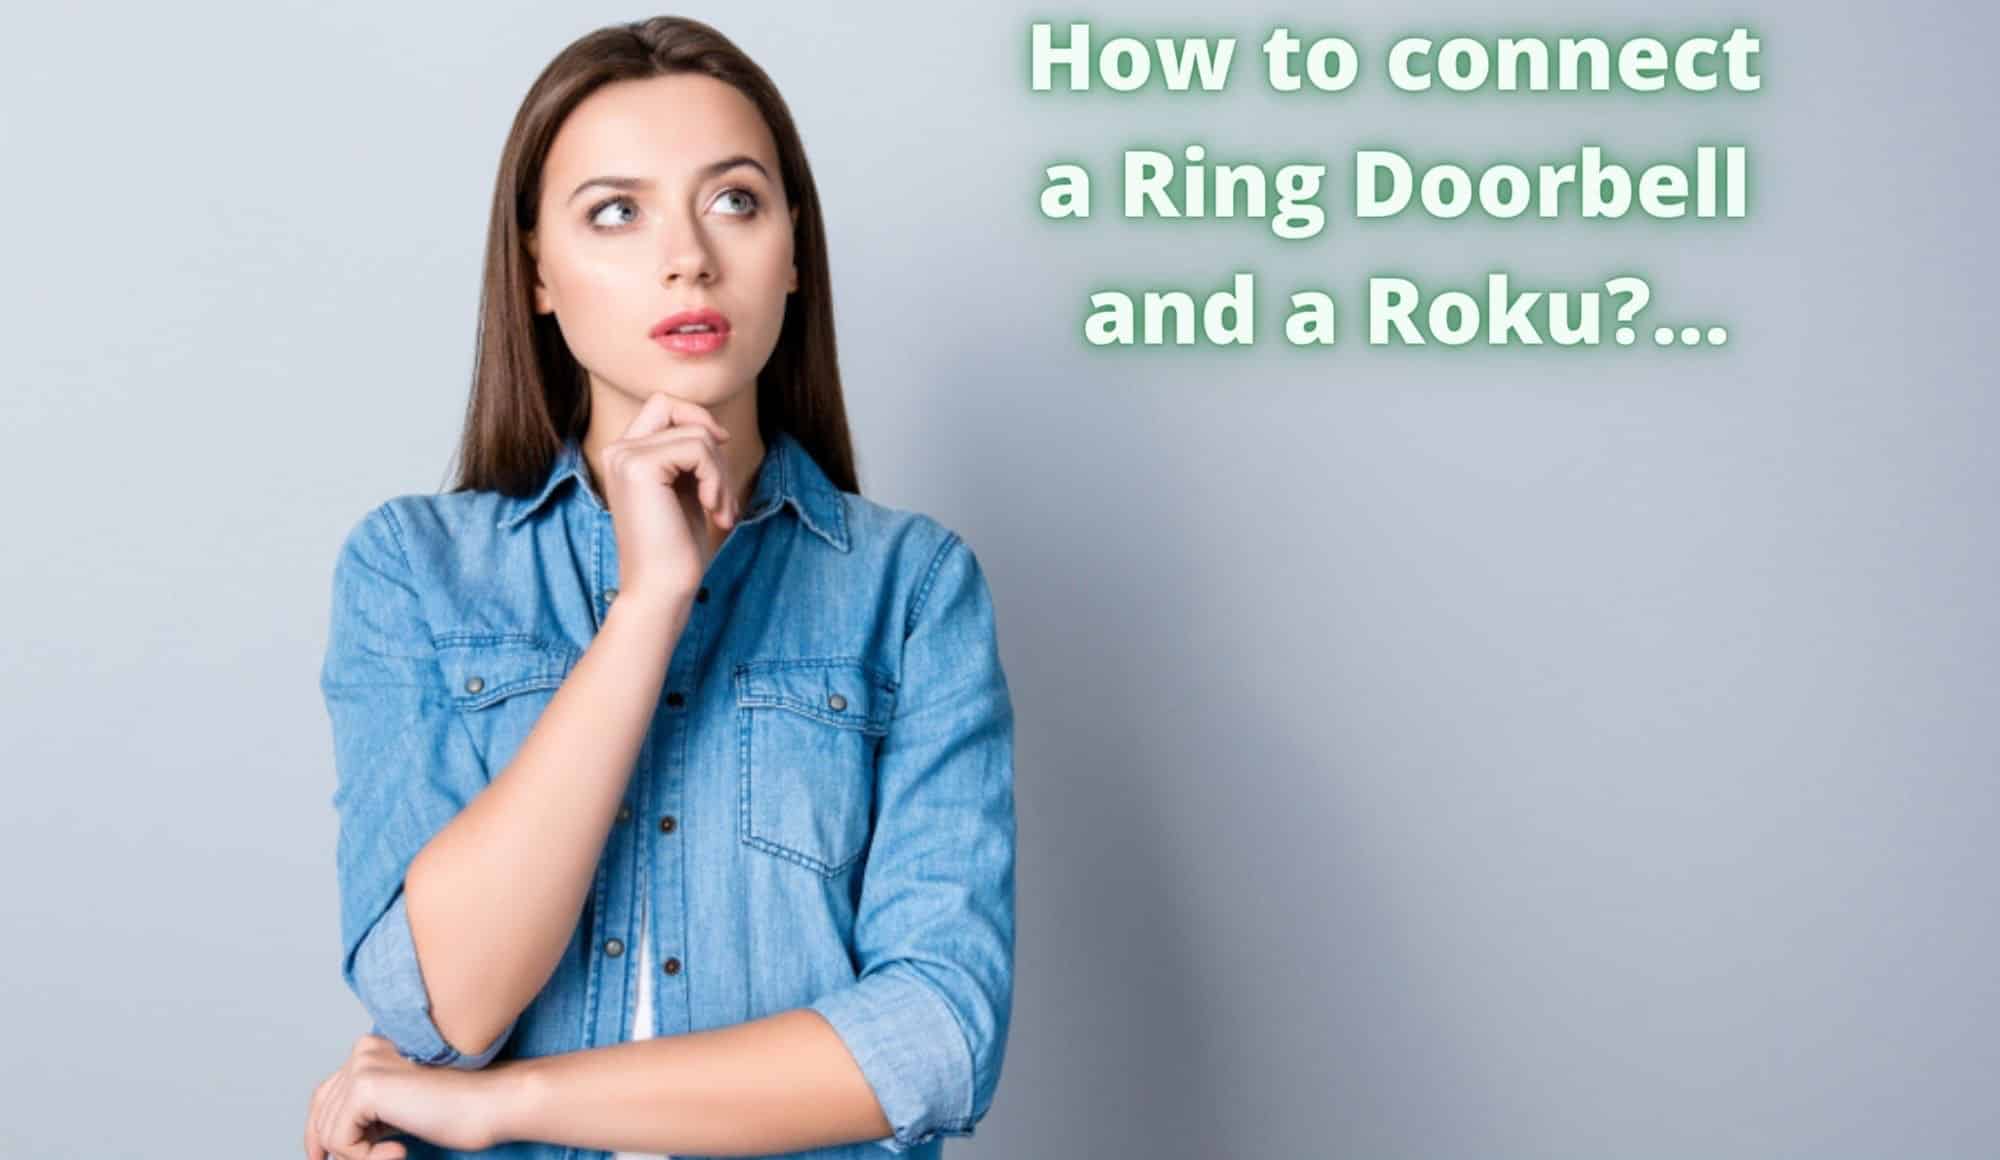 How to connect a Ring Doorbell and a Roku